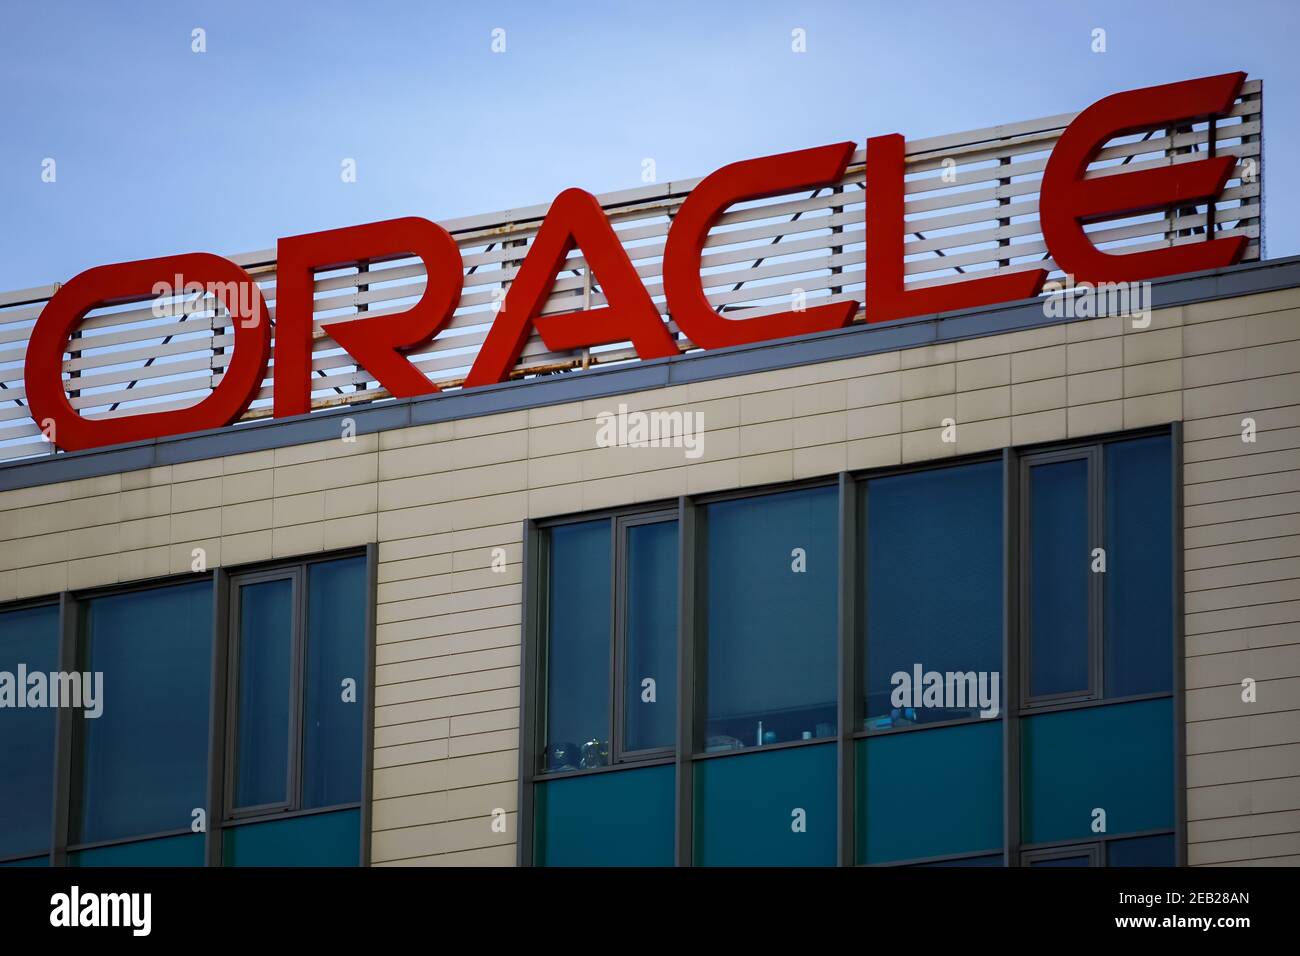 Bucharest, Romania - January 21, 2021: Oracle logo is seen on top of Oracle Tower B building, near Pipera bridge, in Bucharest, Romania. This image is Stock Photo